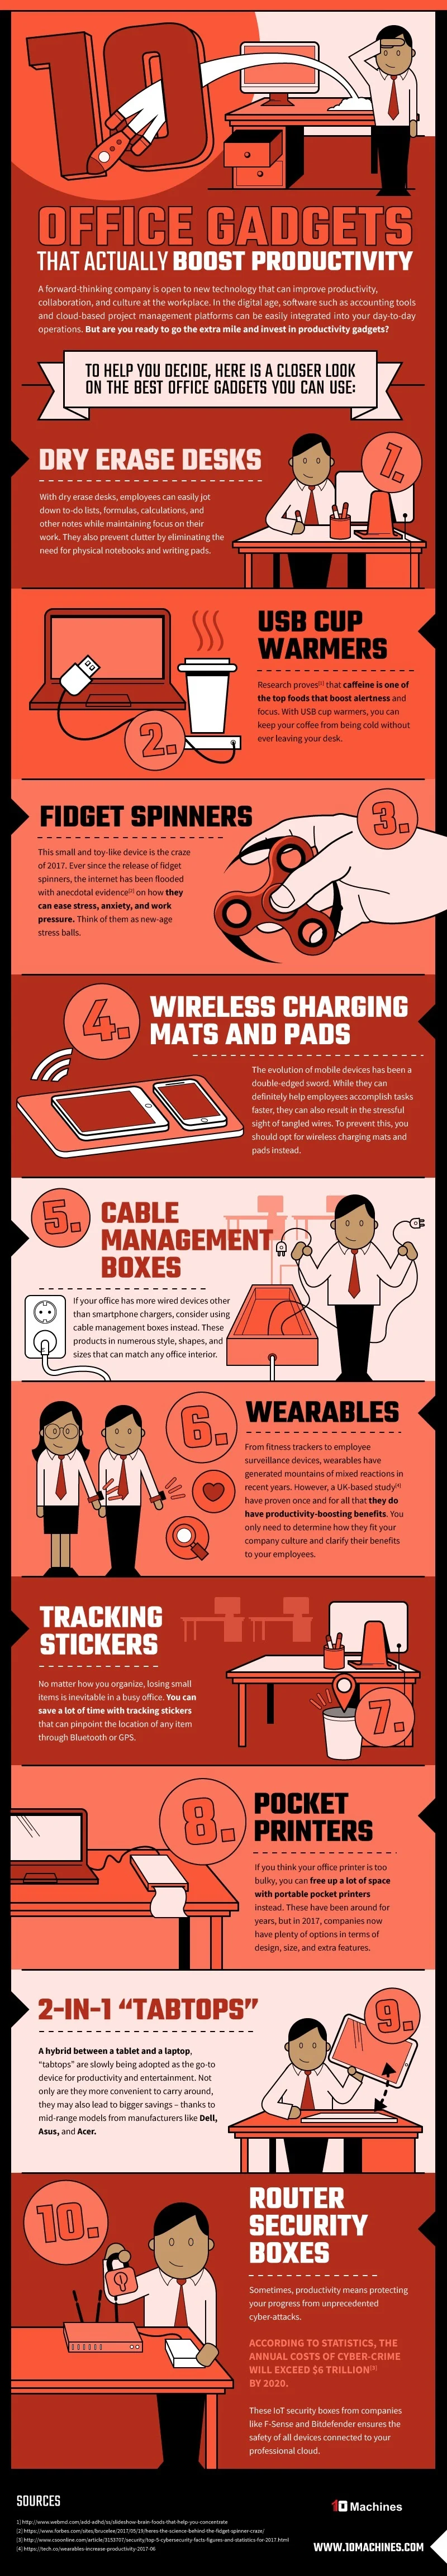 10 Desk Hacks to Improve Your Thinking and Alertness At Work [infographic]